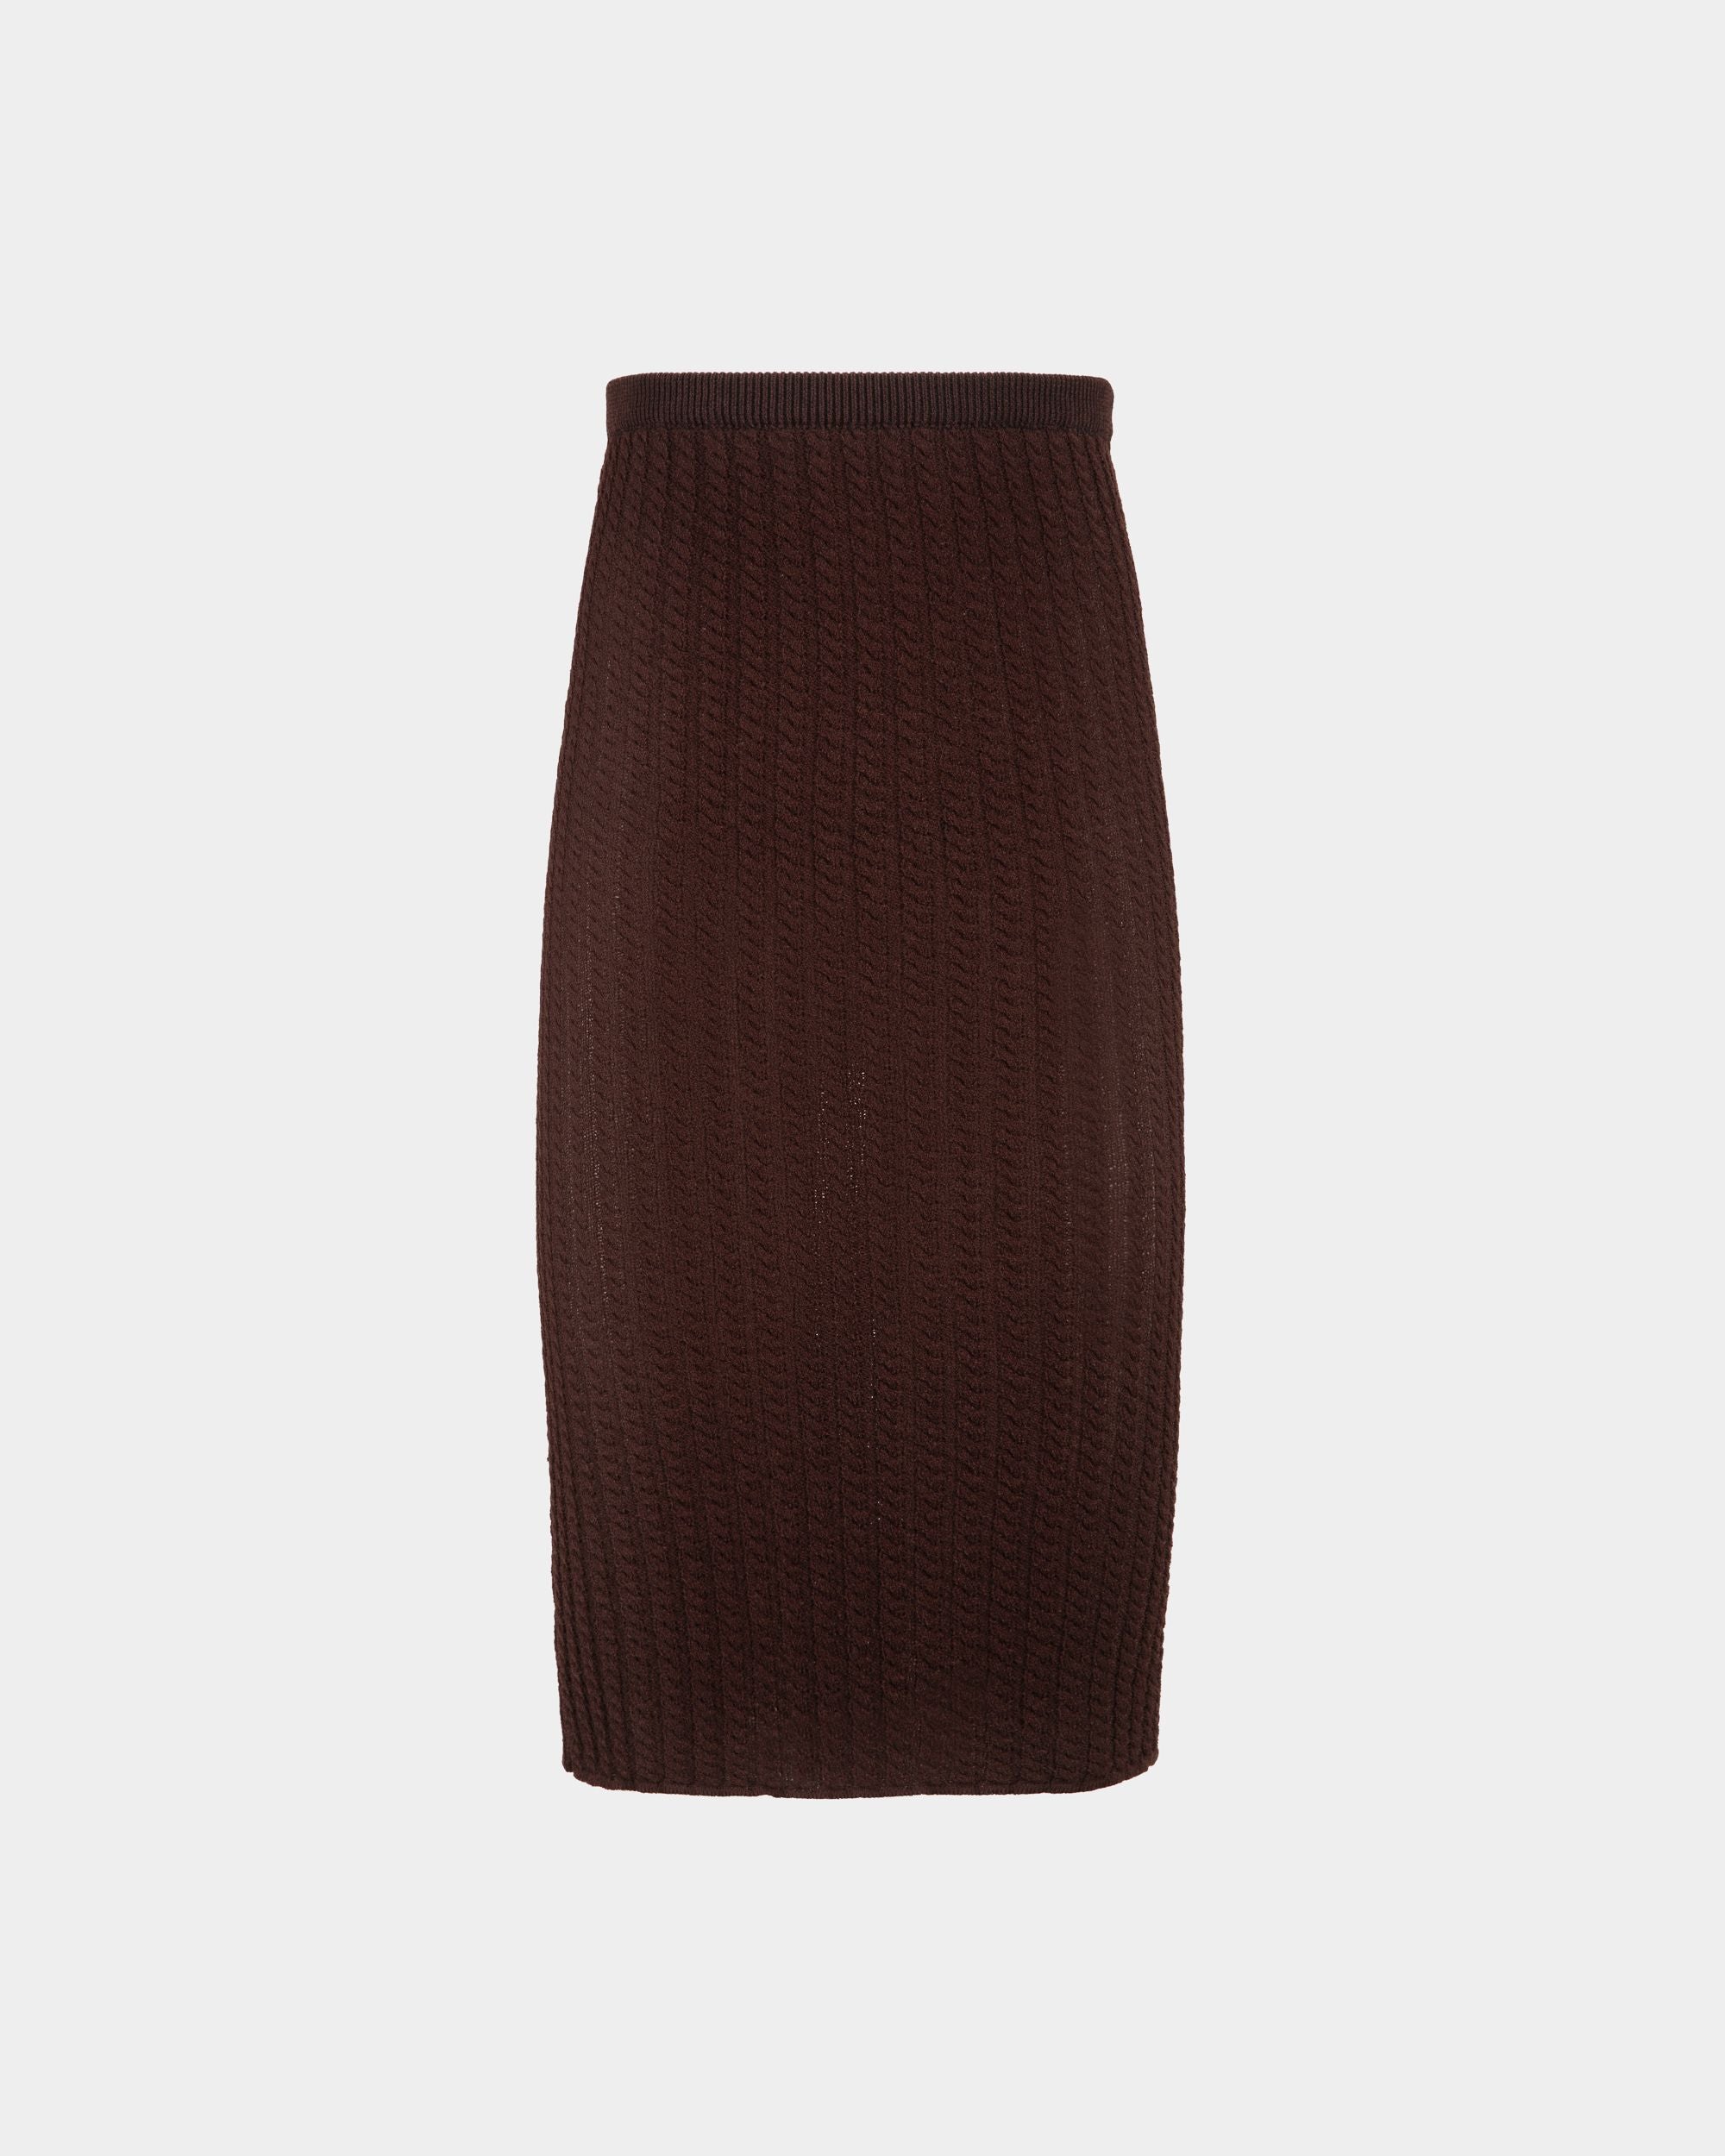 Women's Midi Skirt in Brown Knit Fabric | Bally | Still Life Front